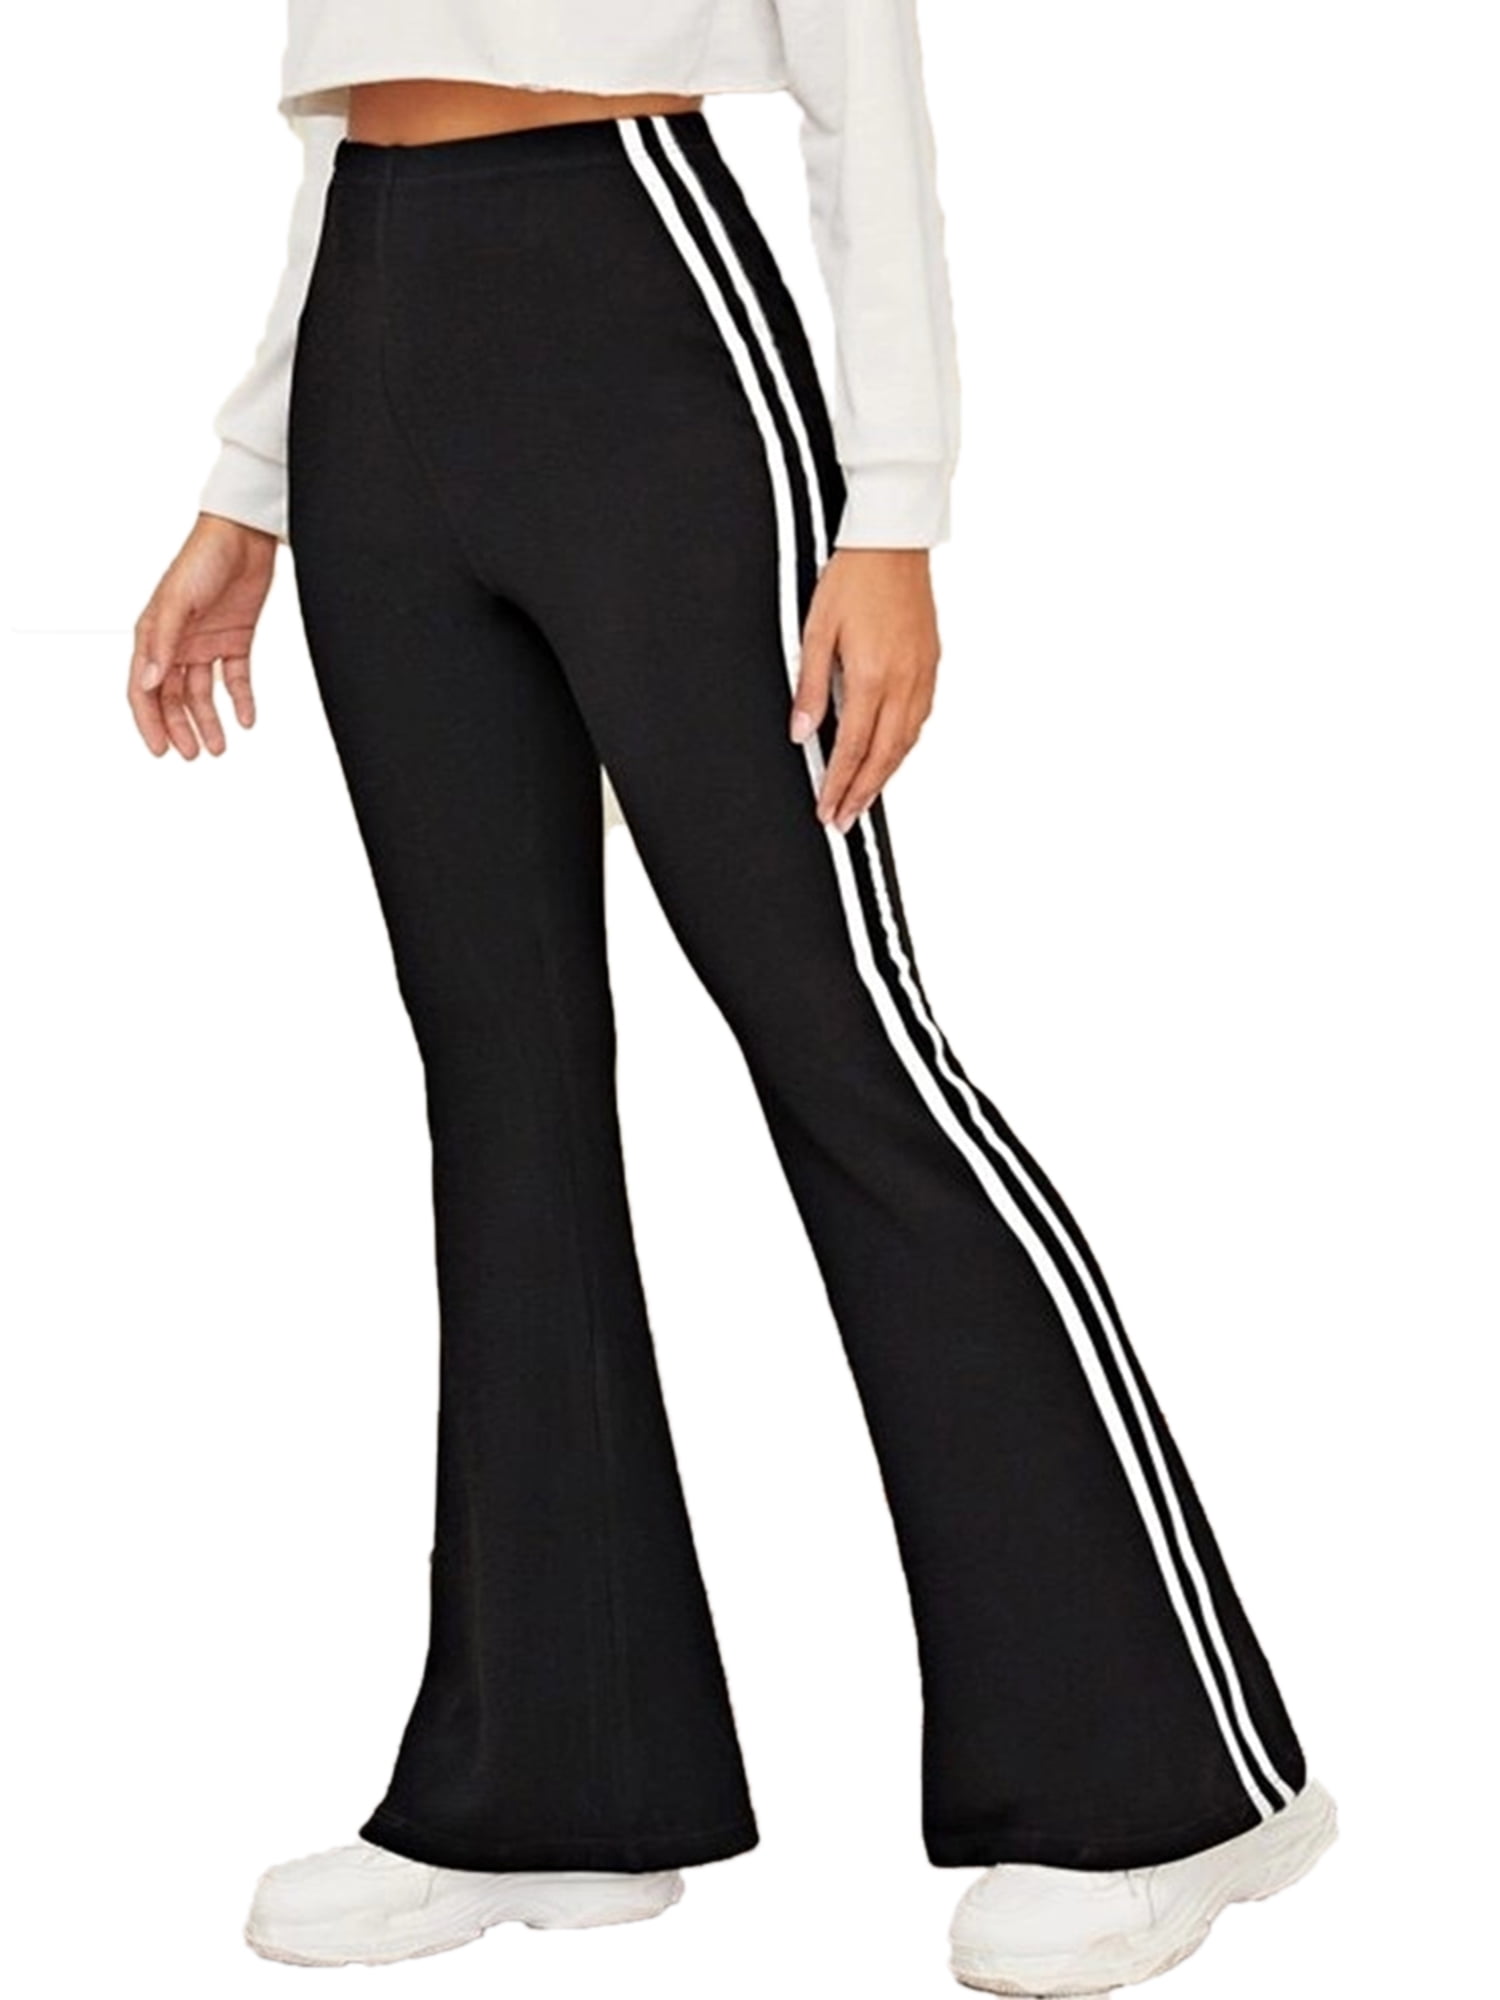 Sexy Dance Woman Lady Jogging Flared Pants Yoga Workout Bell Bottom Legging  Side Stripe Sweatpants Casual Gym Work Trousers Activewear 